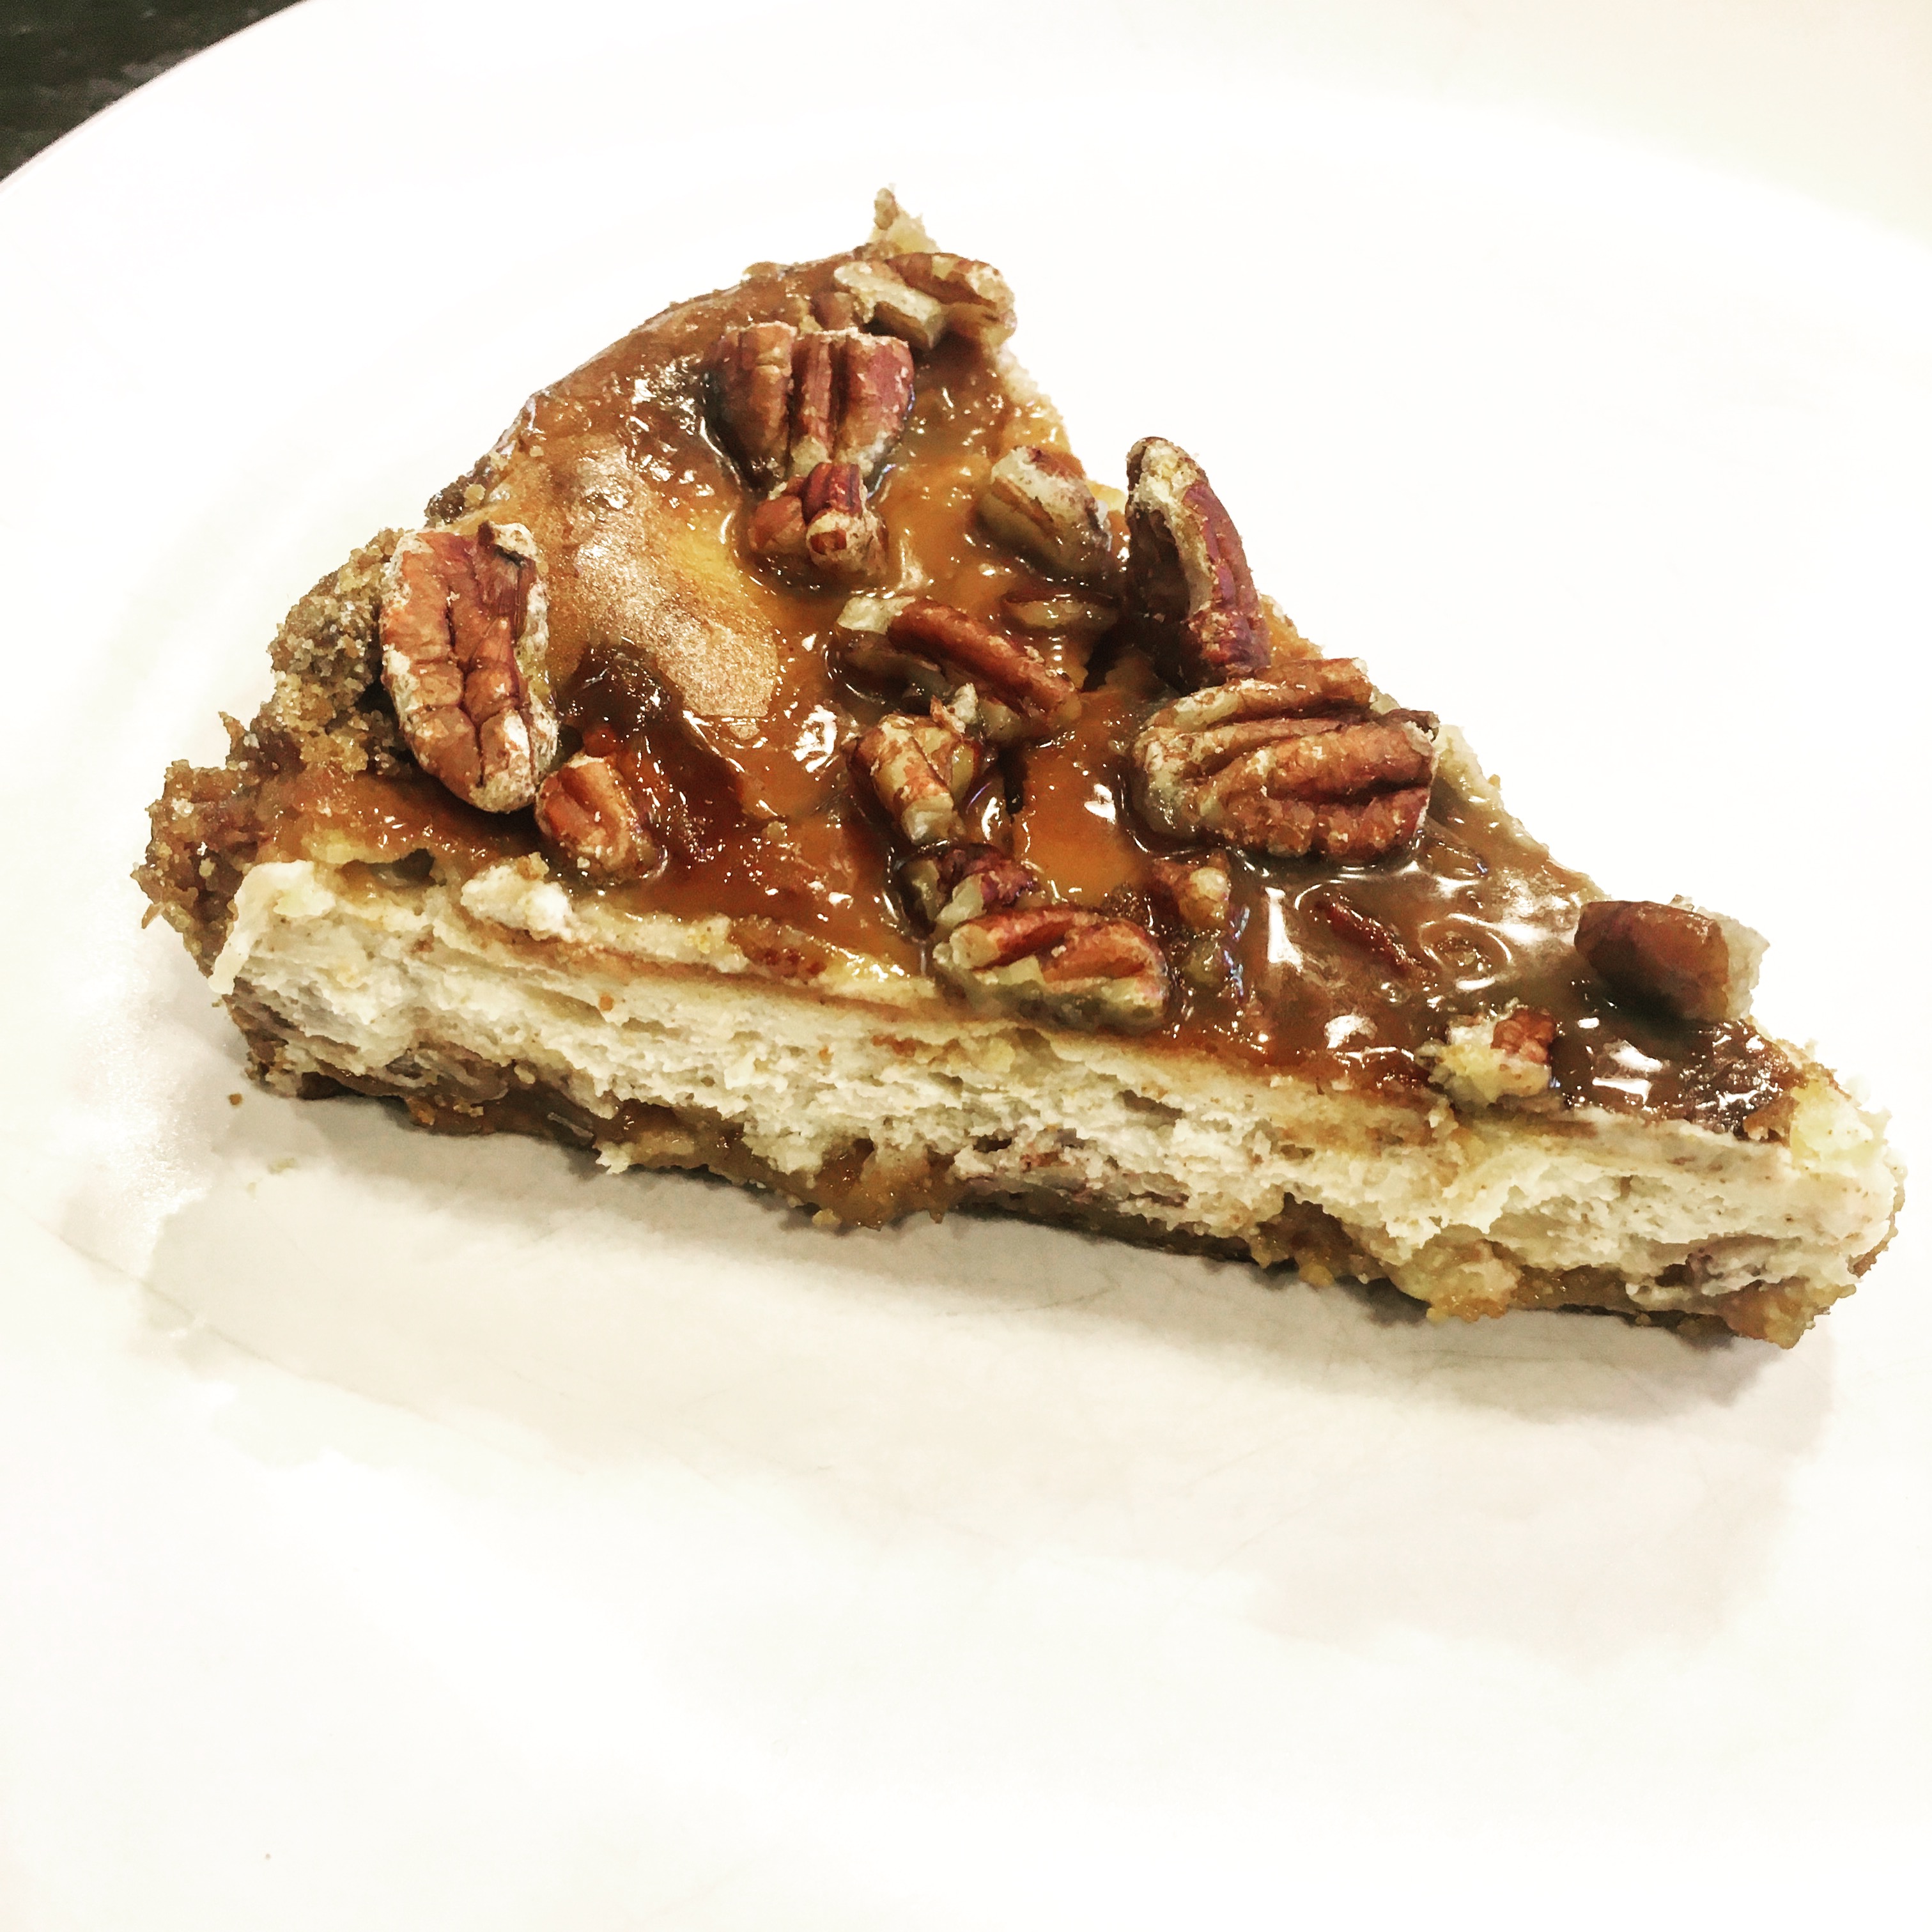 Recipe of the month: caramel apple cheesecake satisfies a craving